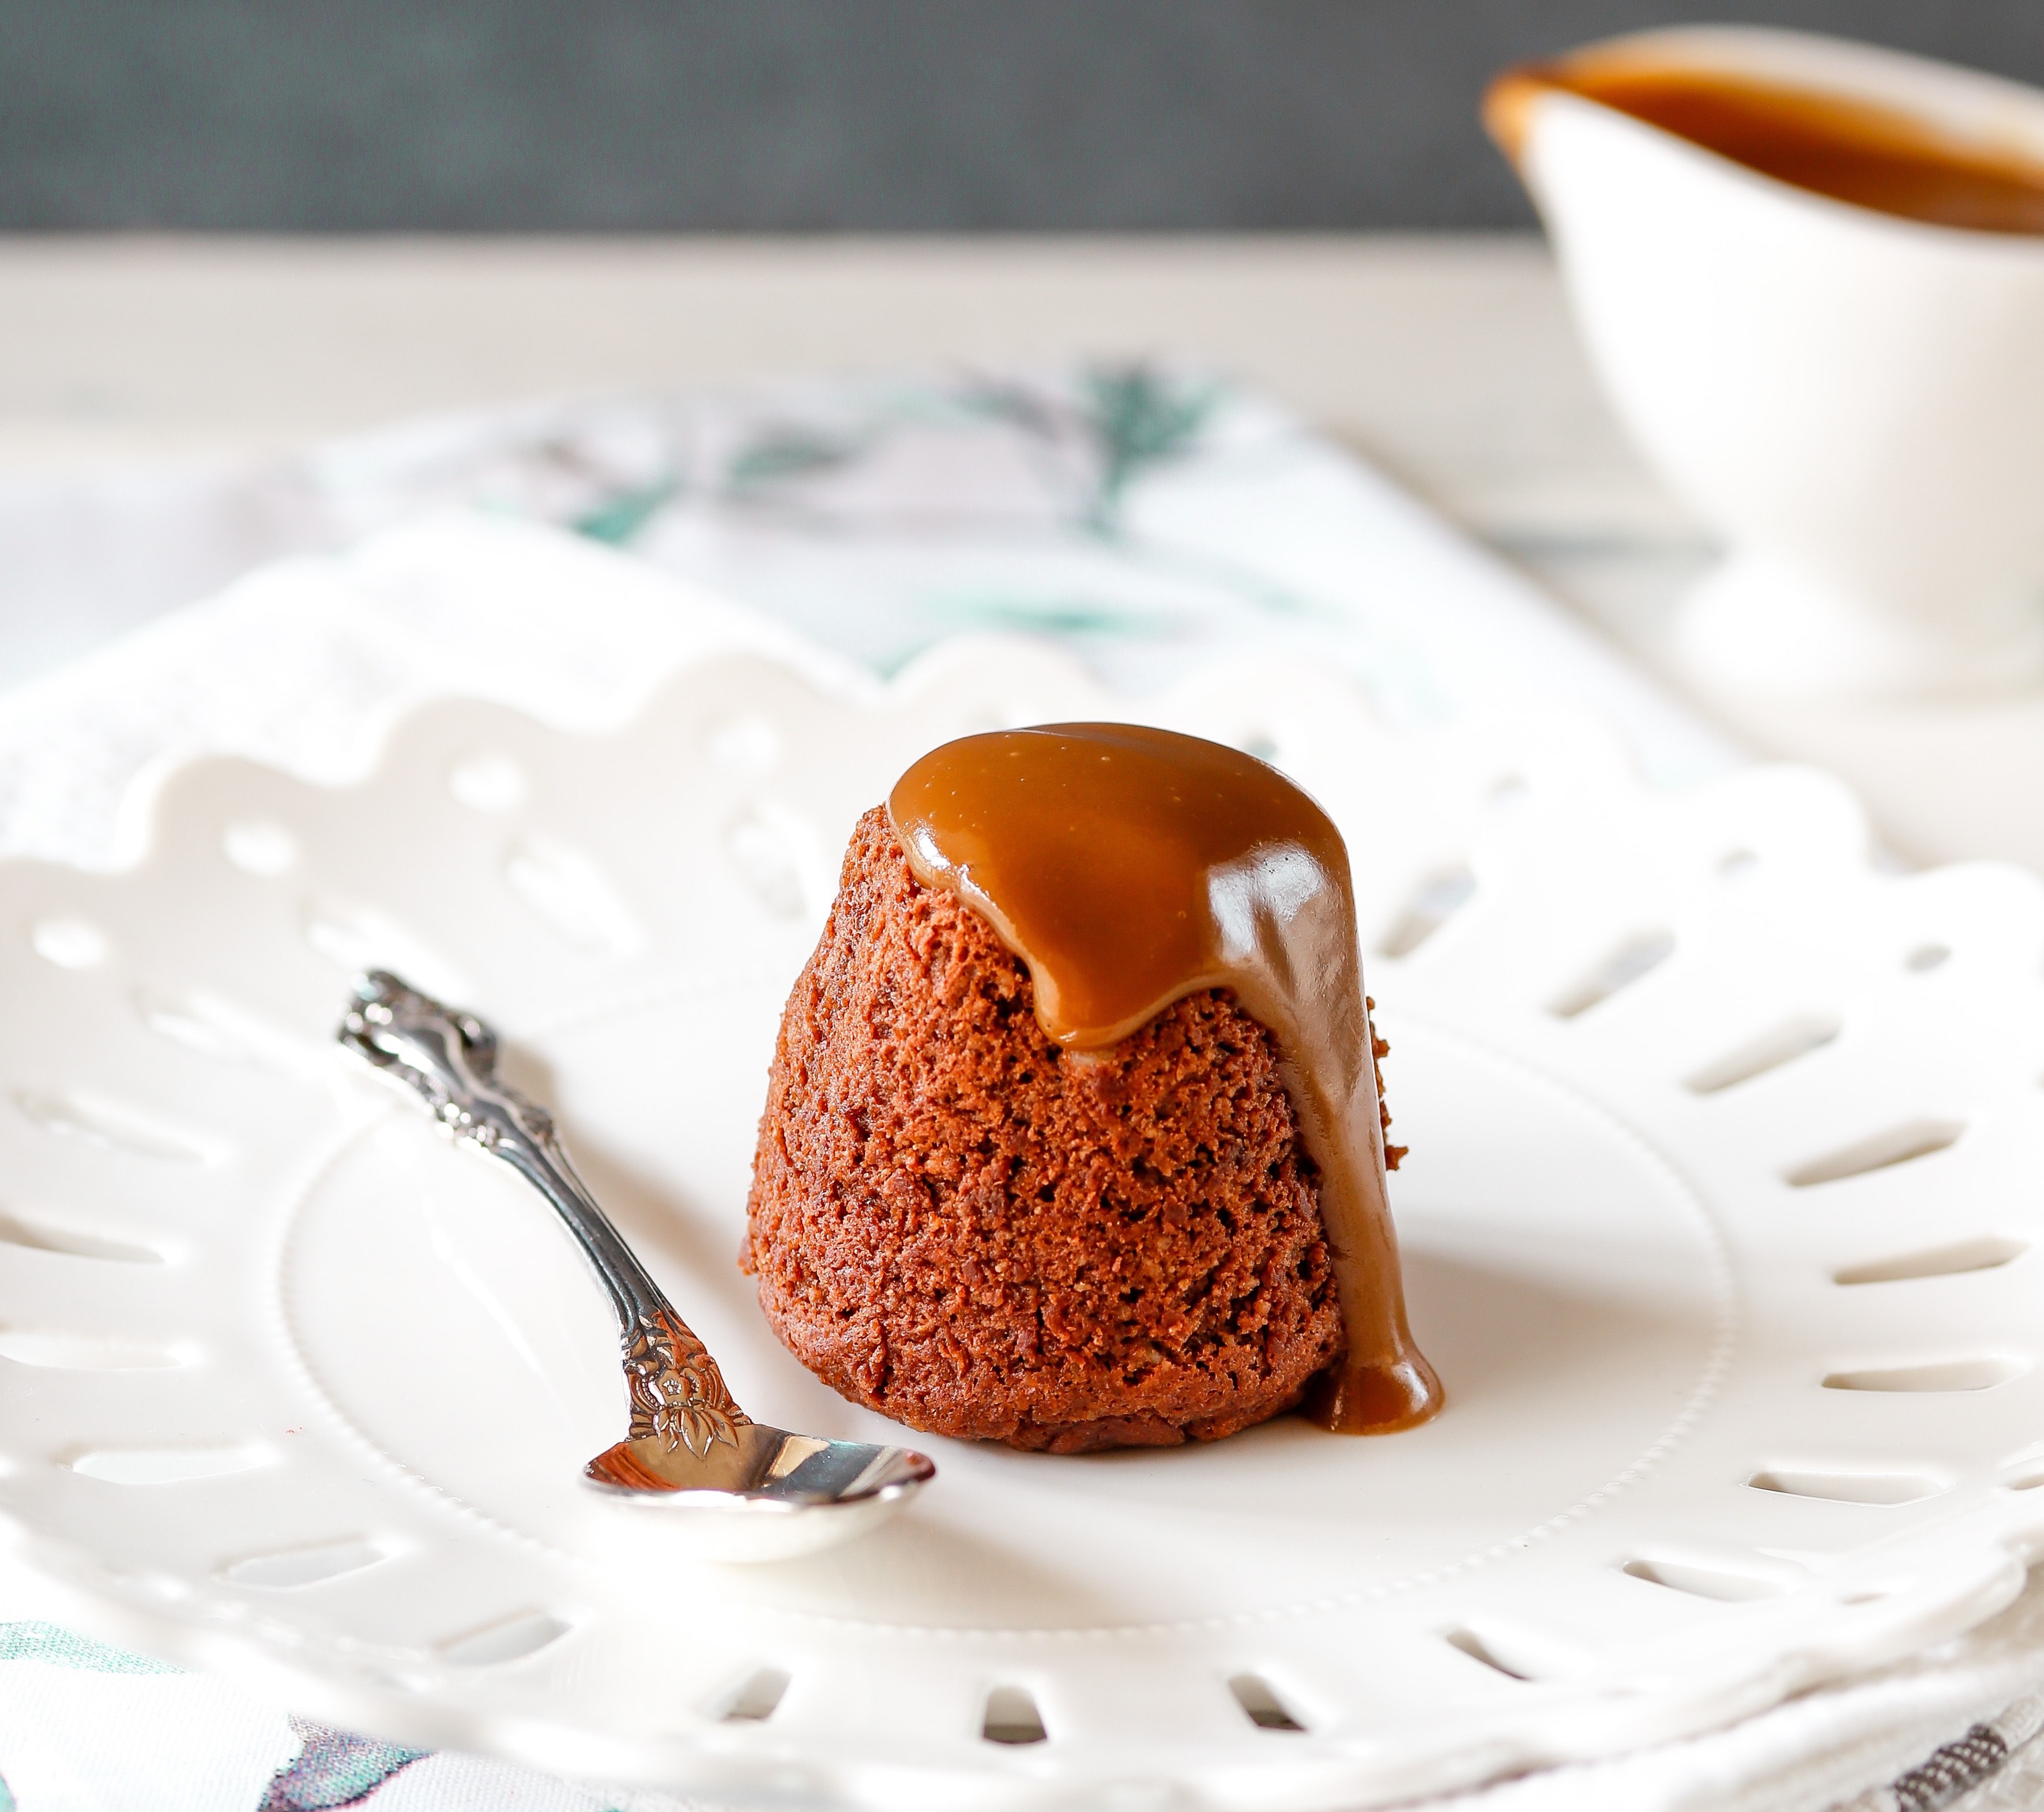 THMIII: Chocolate Puddings with Salted Caramel Sauce - skinnymixers